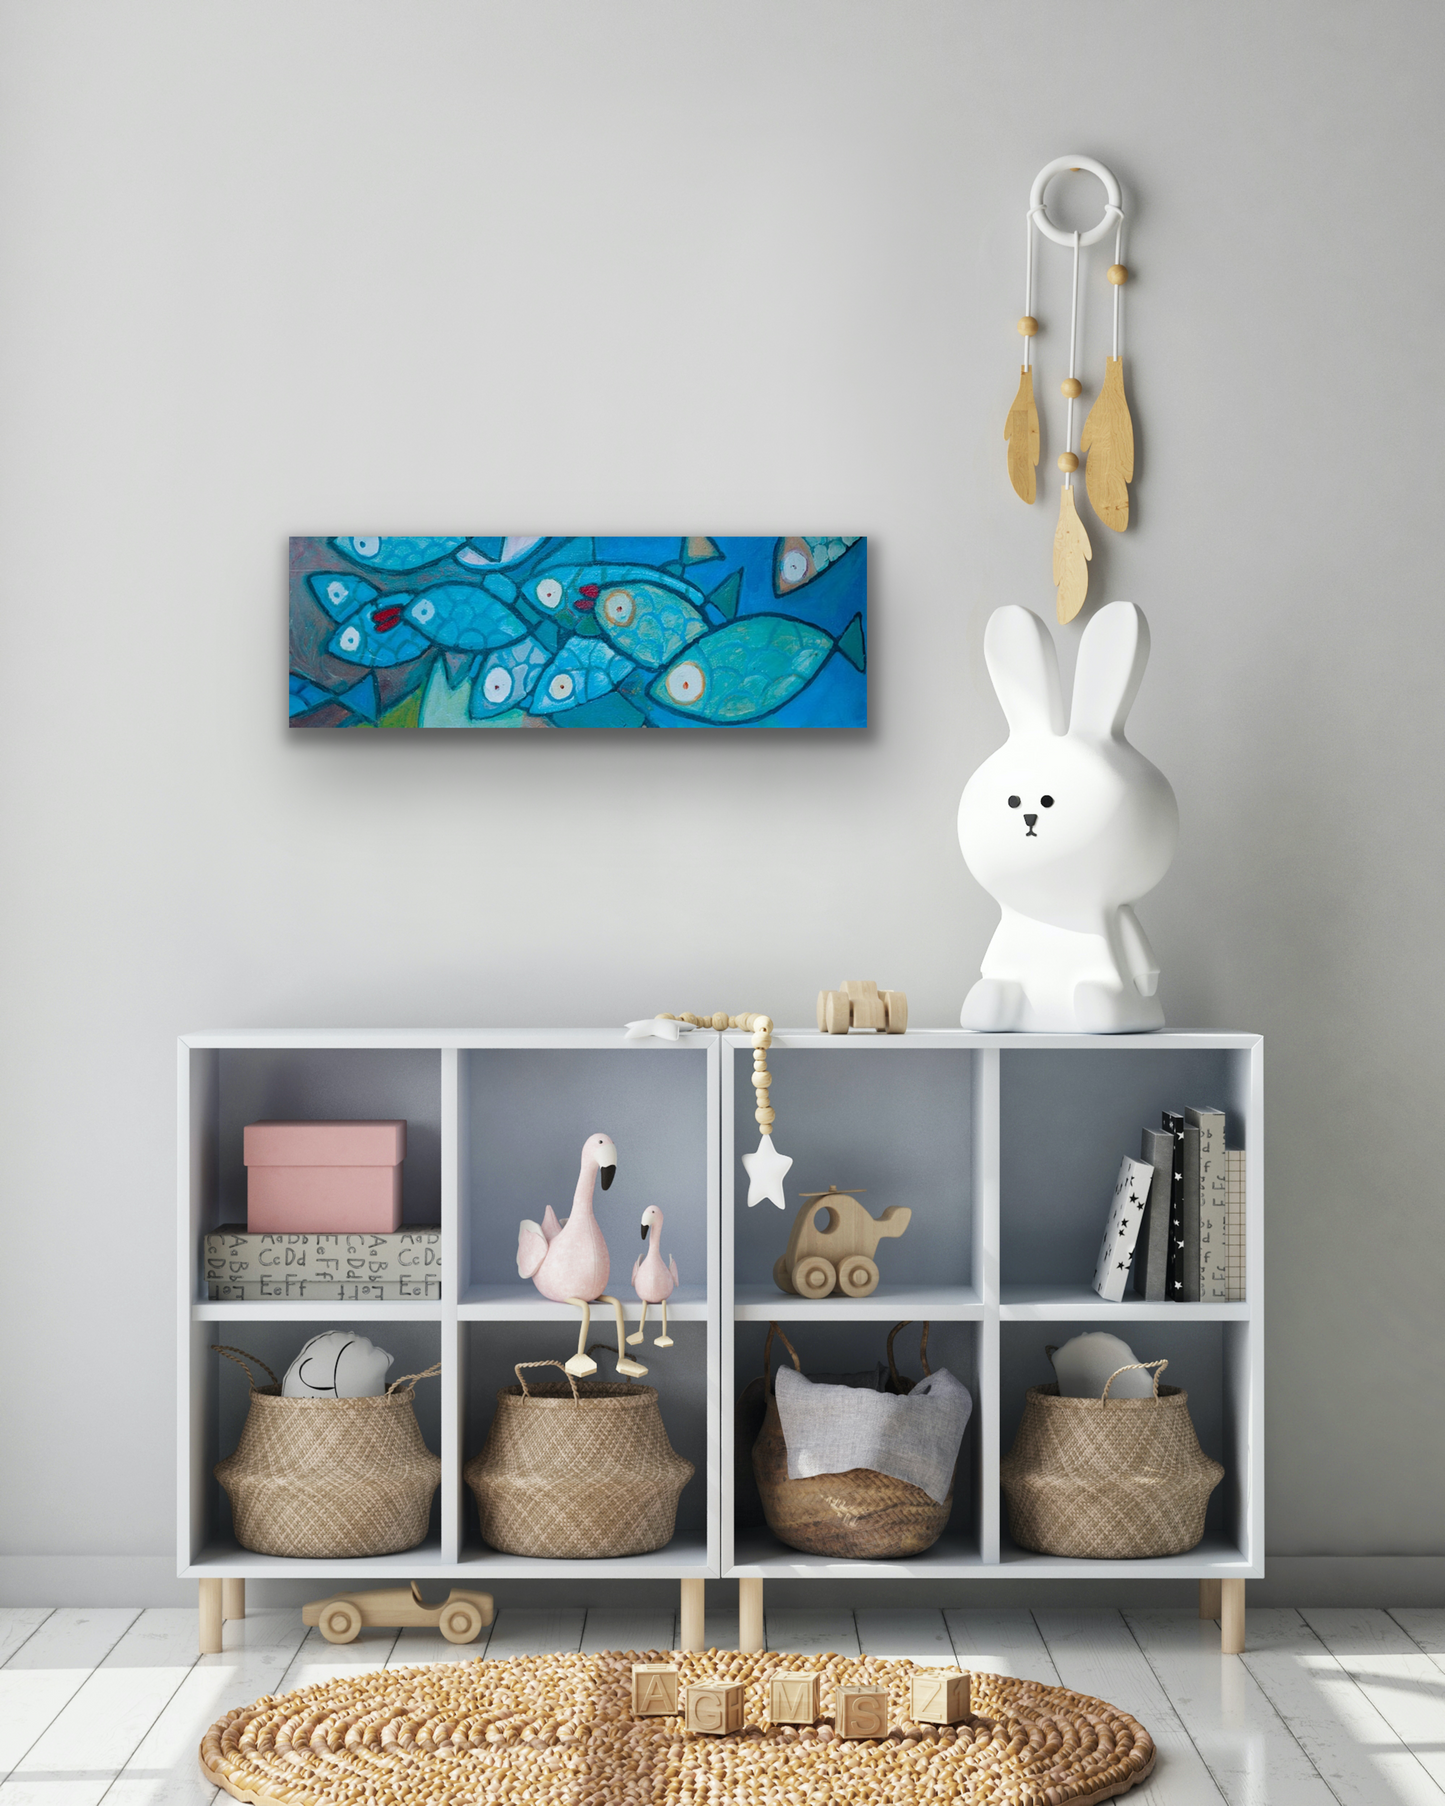 Ten Little Fishes work of art comes in three different canvas print sizes.